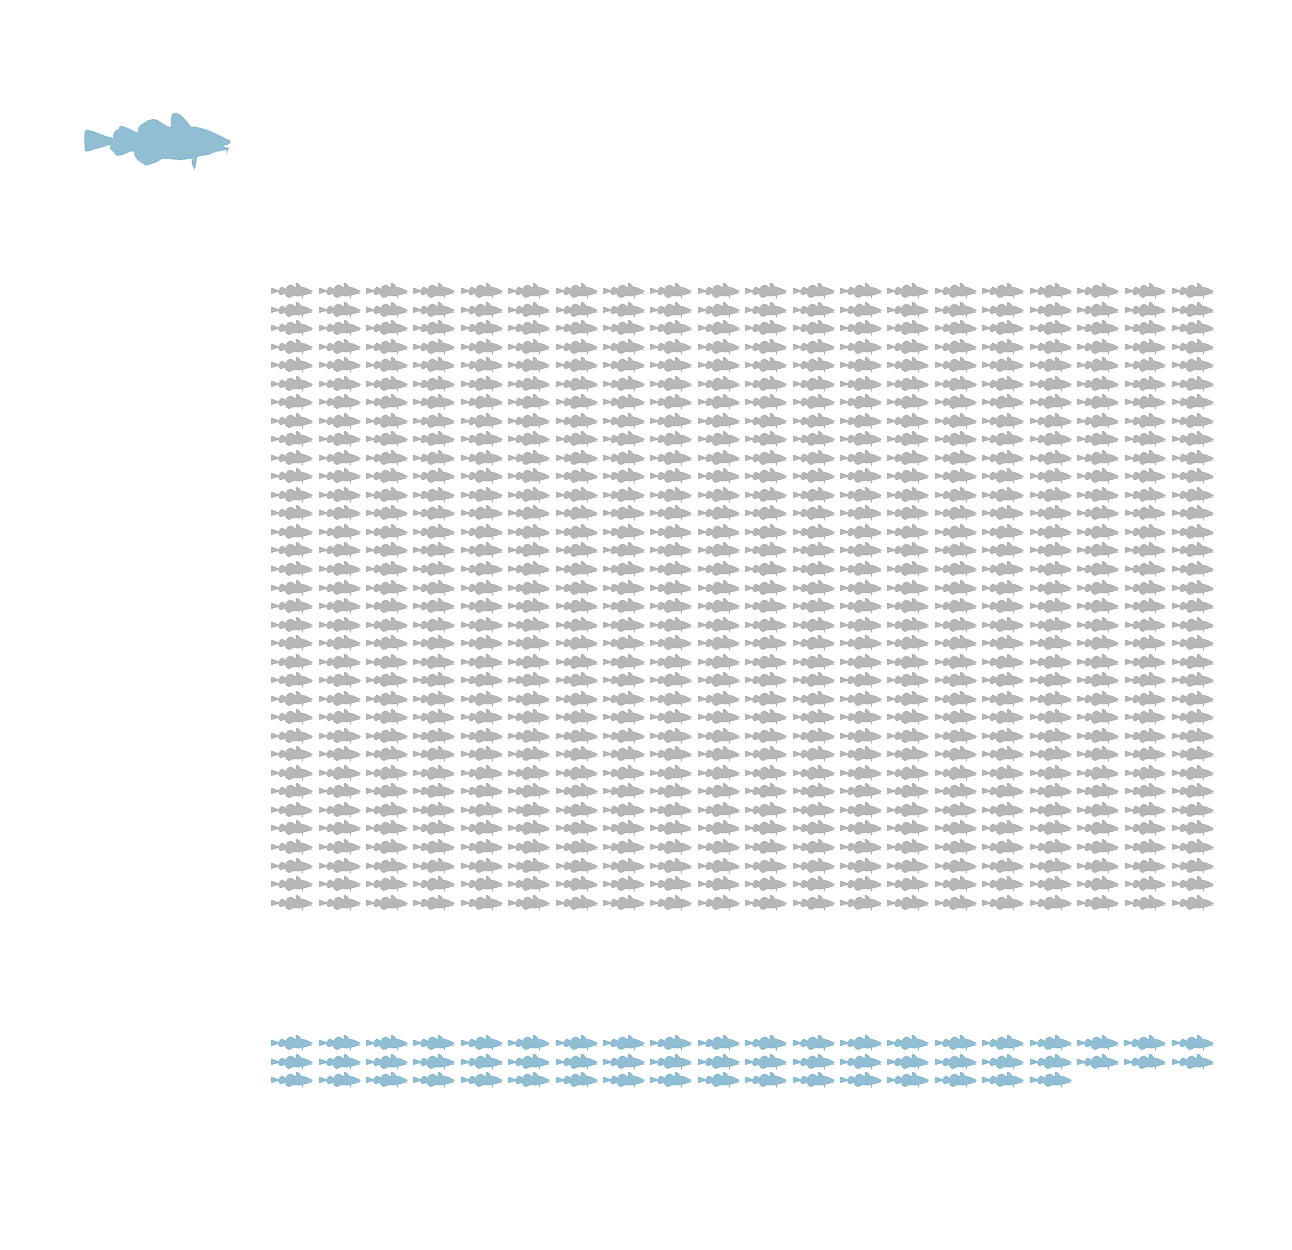 Graphic showing the historic population of Cod — Atlantic